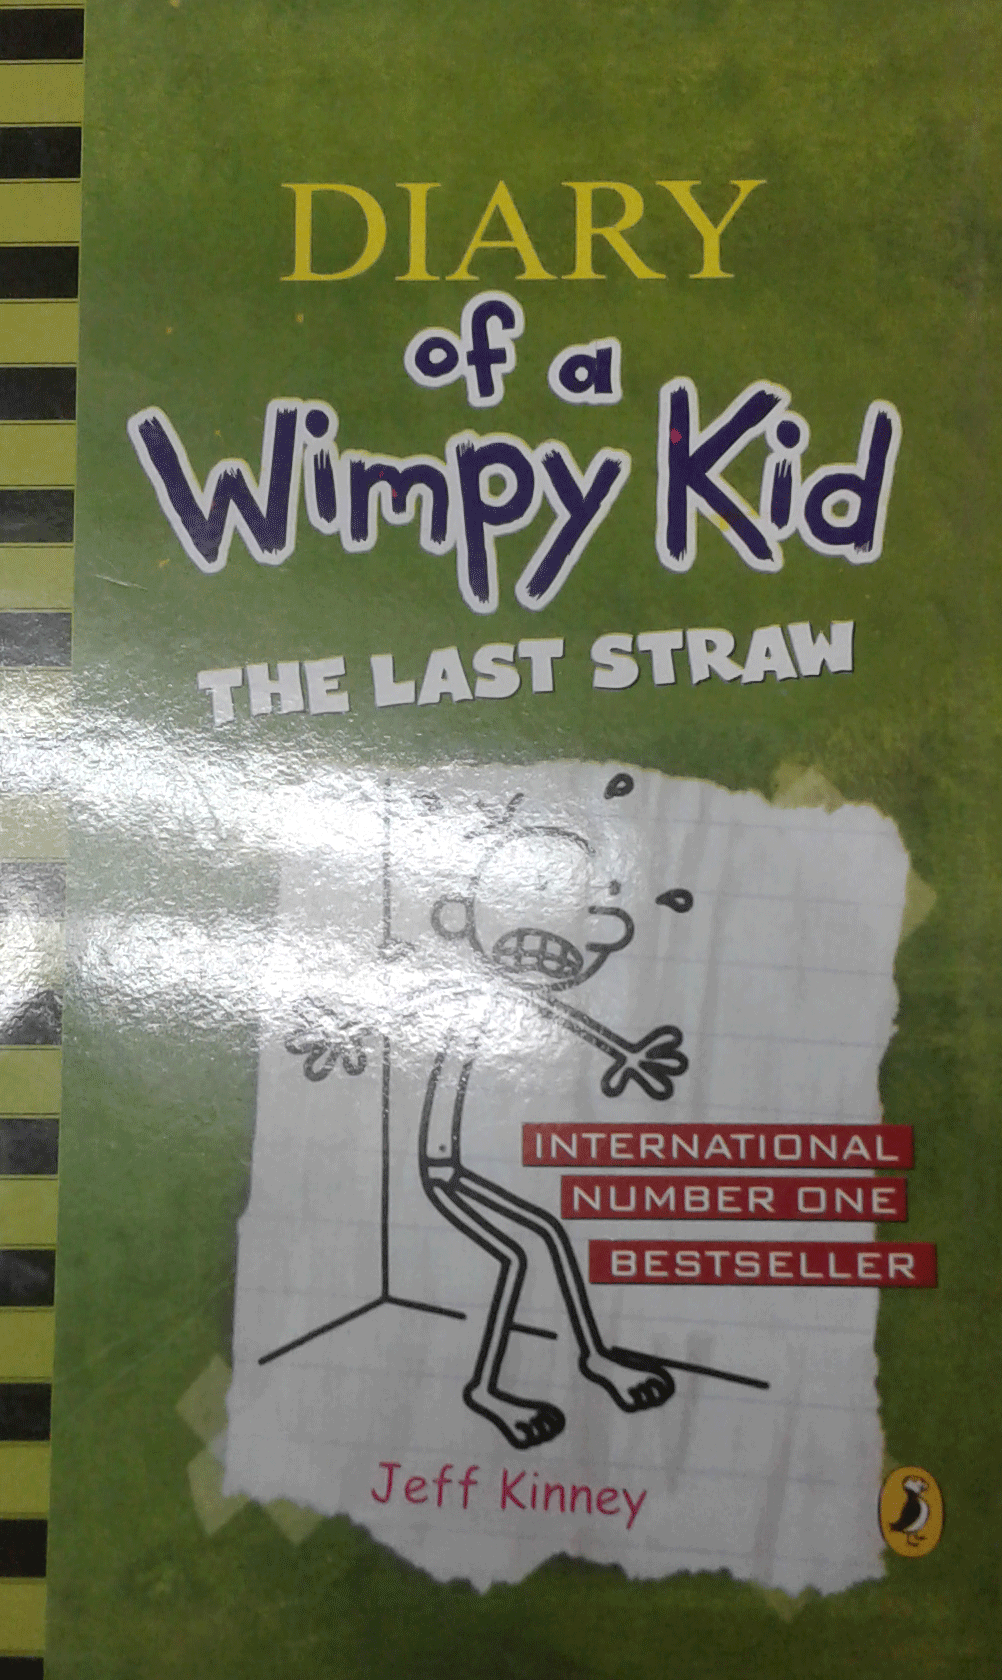 DIARY OF A WIMPY KID THE LAST STRAW